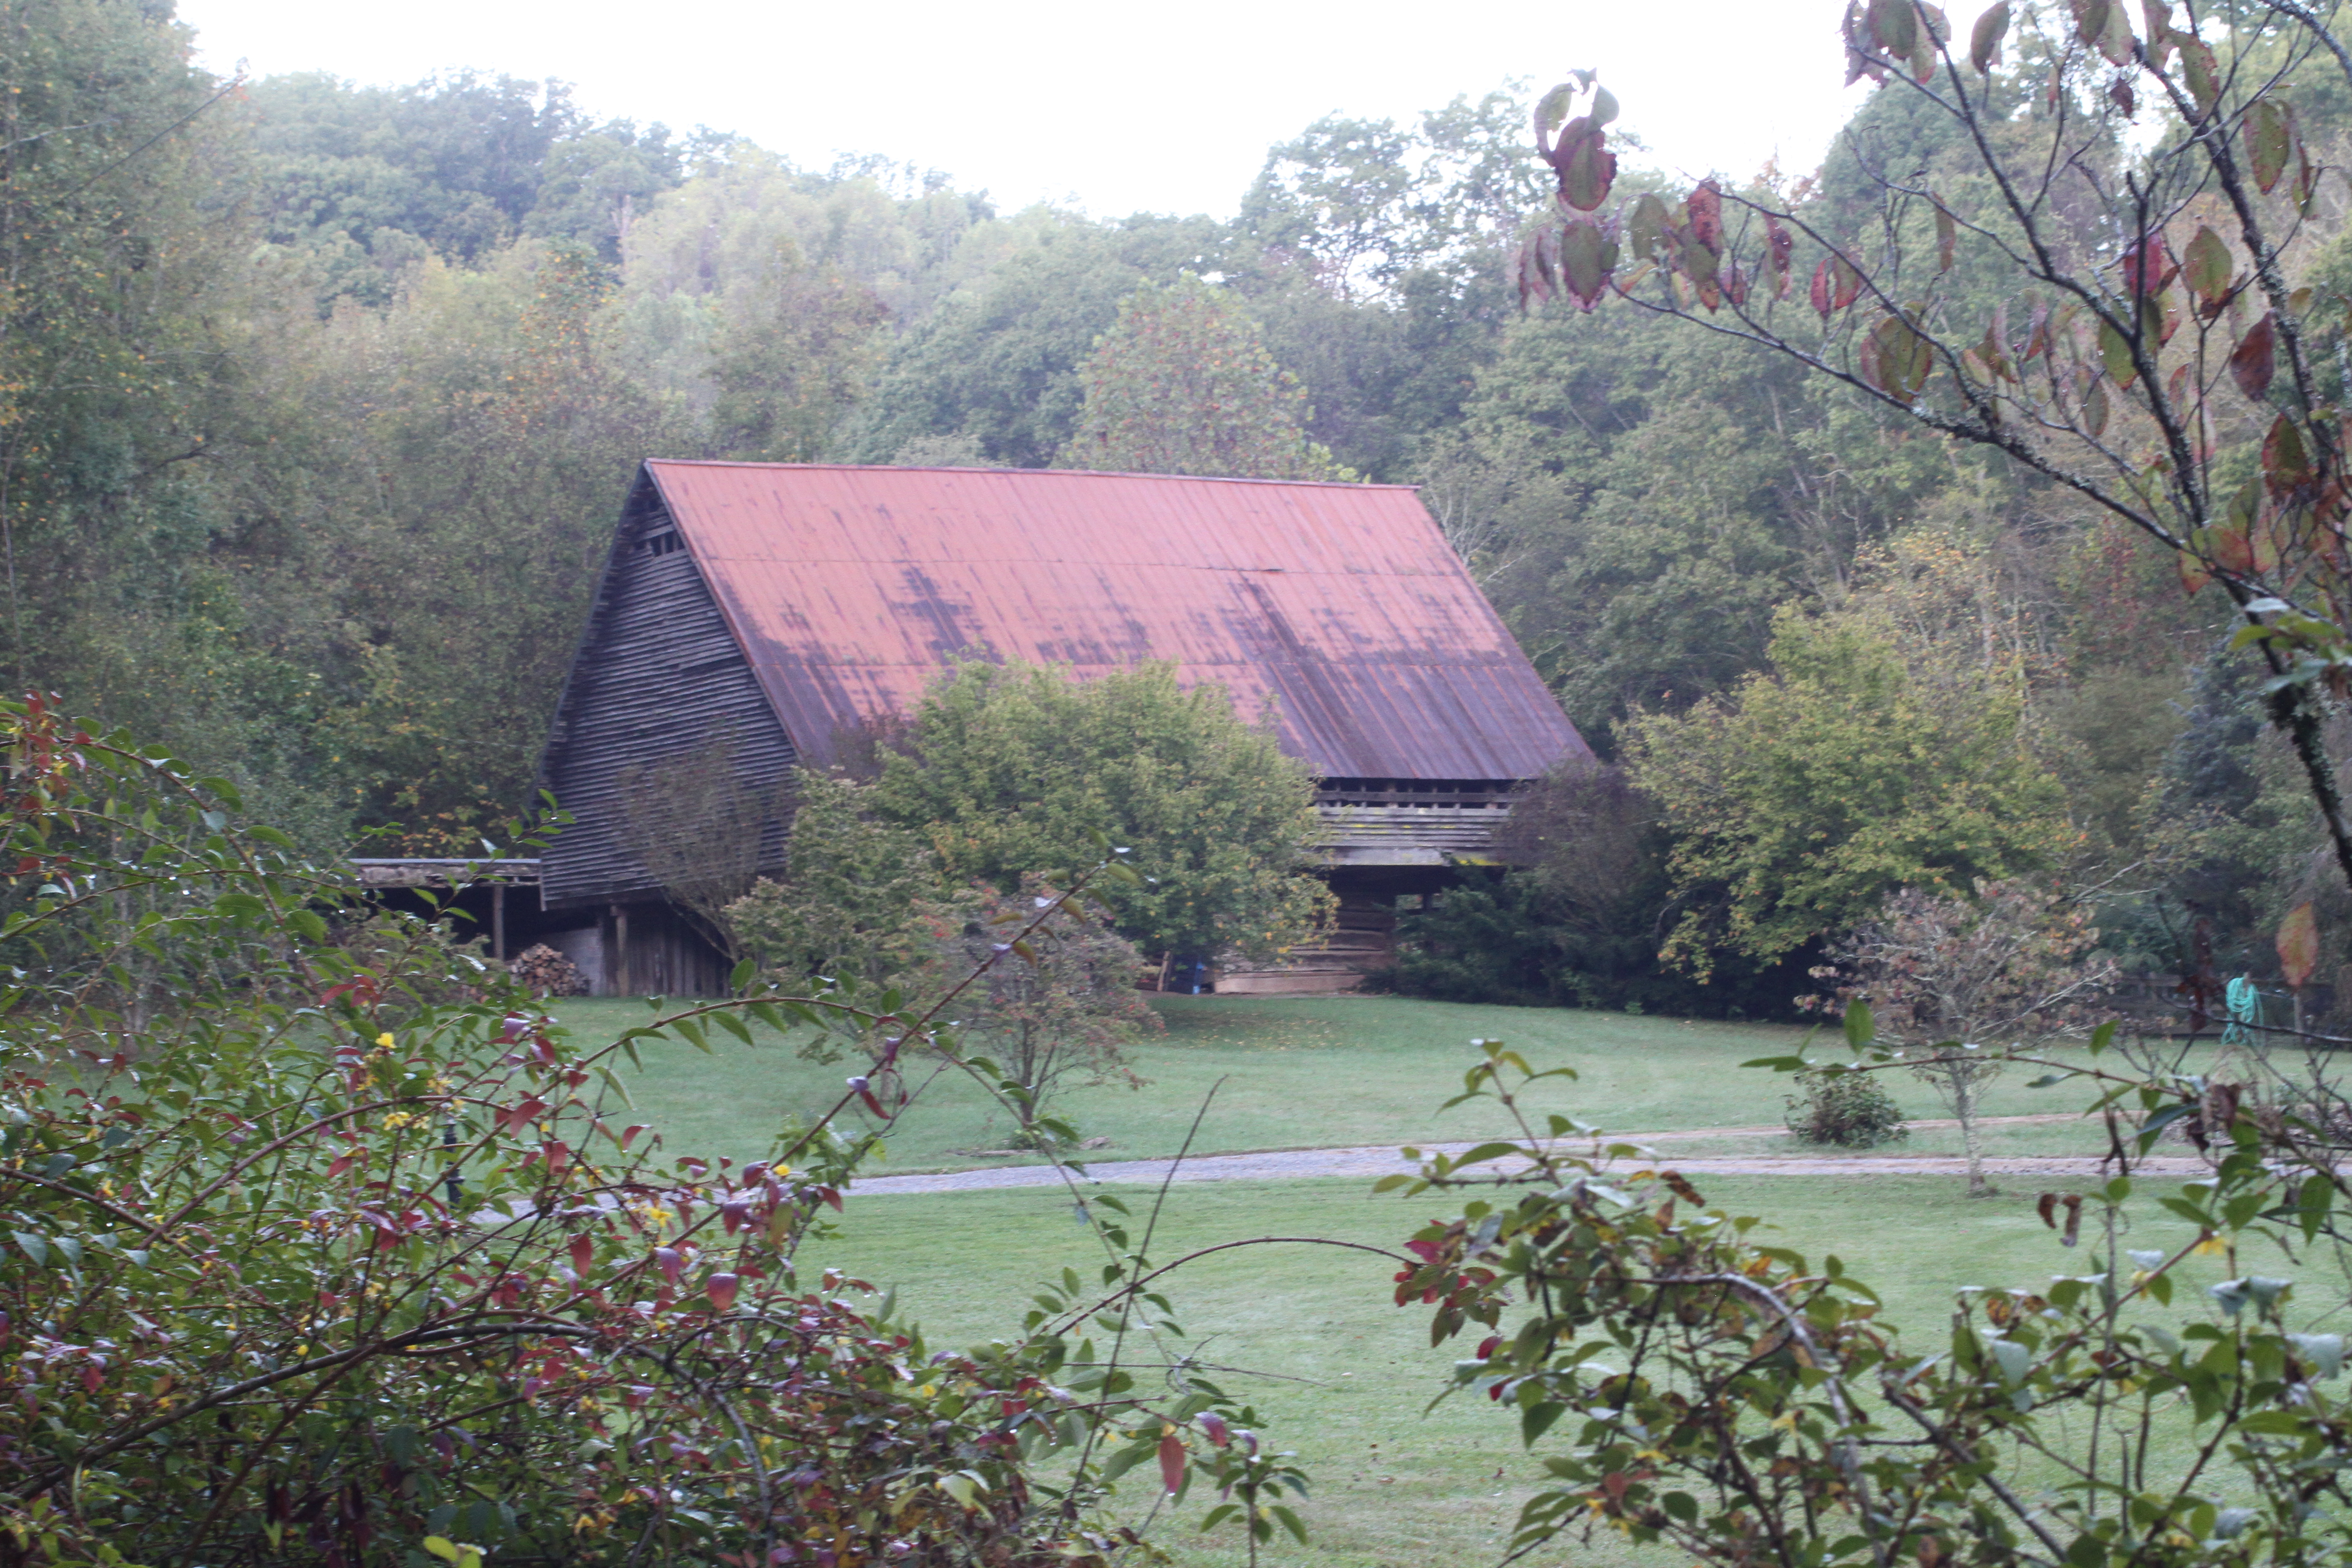 Oldest Cantilever Barn in TN